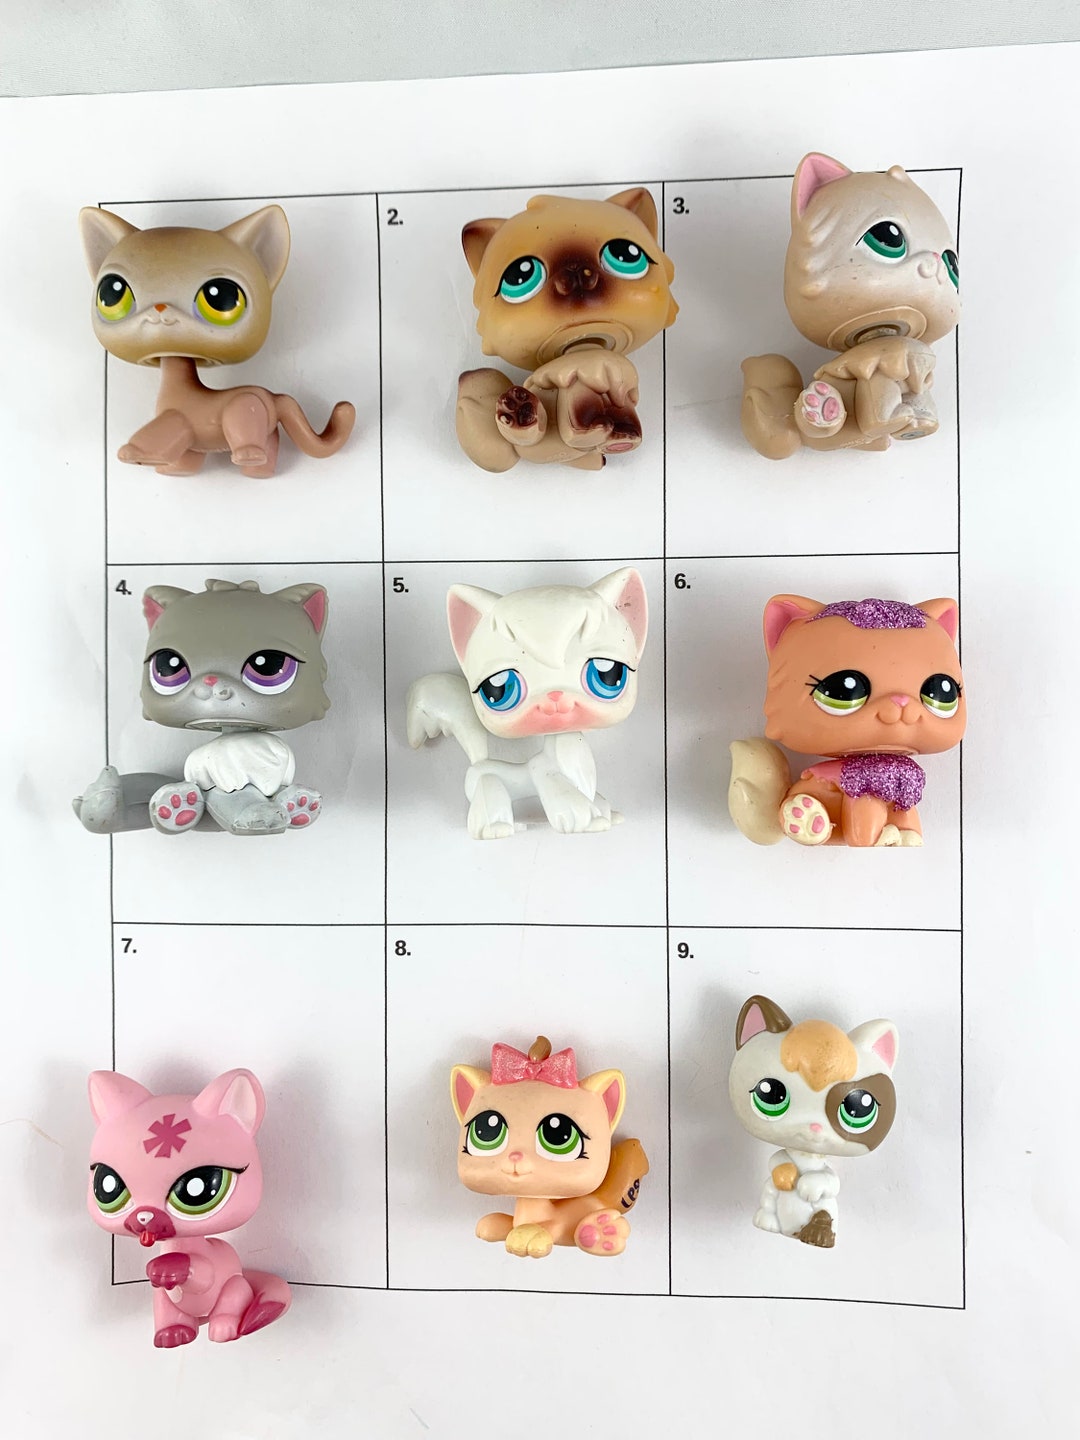 Littlest Pet Shop Pick a Pet 9 to Choose From. Crystal, Sparkle